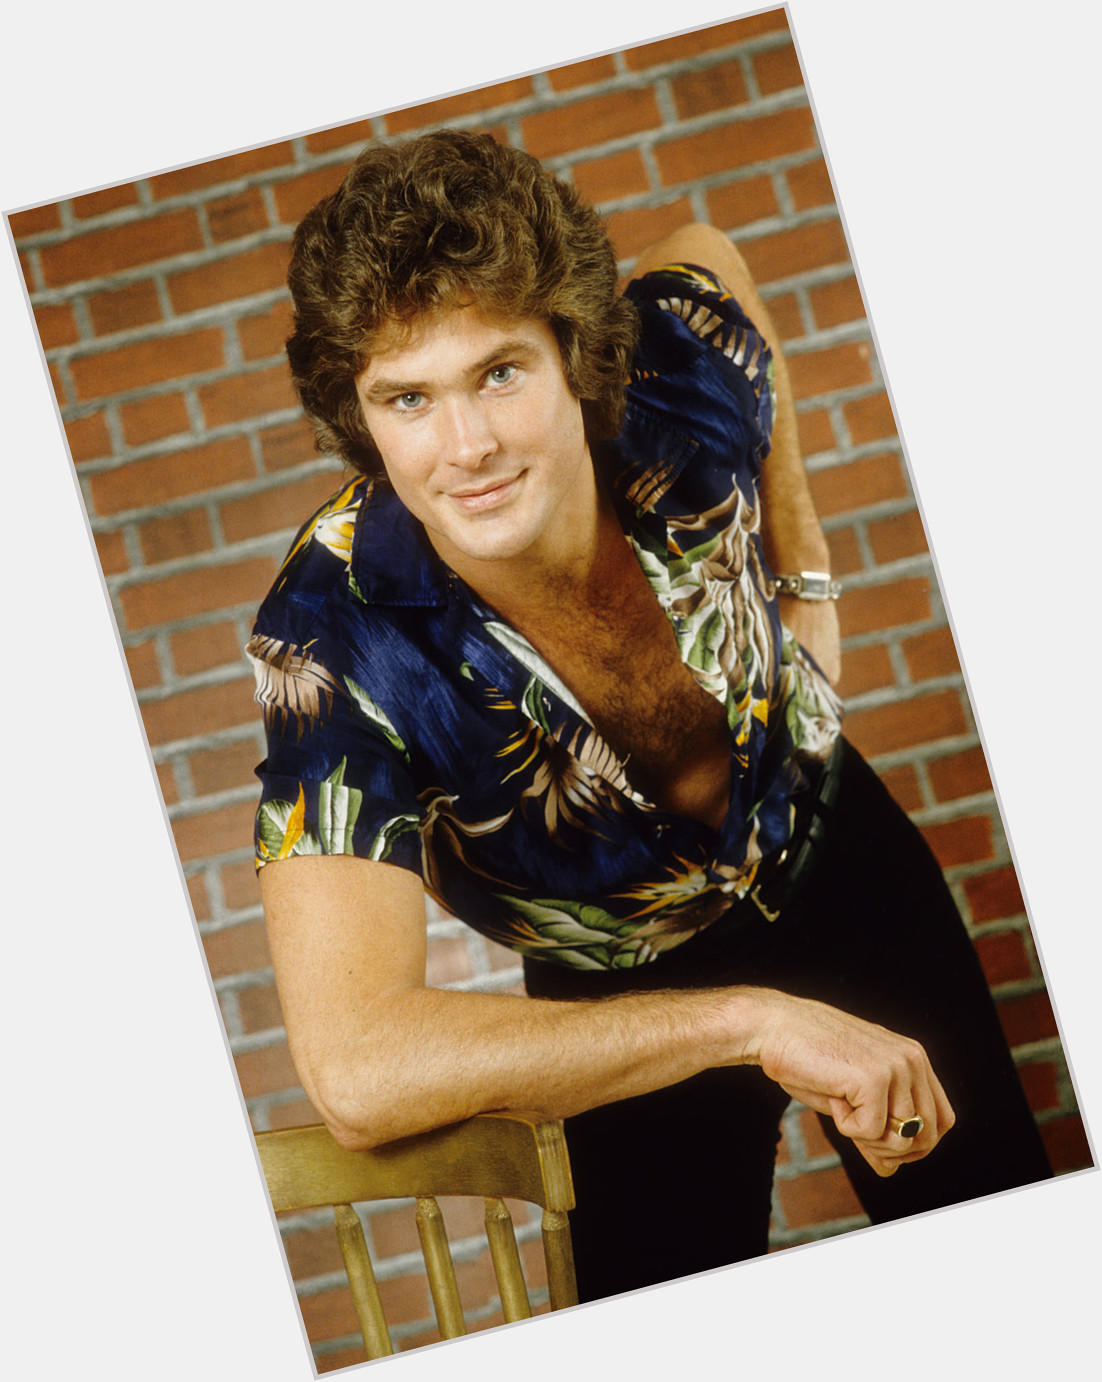 <a href="/hot-men/evil-hasselhoff/is-he-jared">Evil Hasselhoff</a> Athletic body,  grey hair & hairstyles